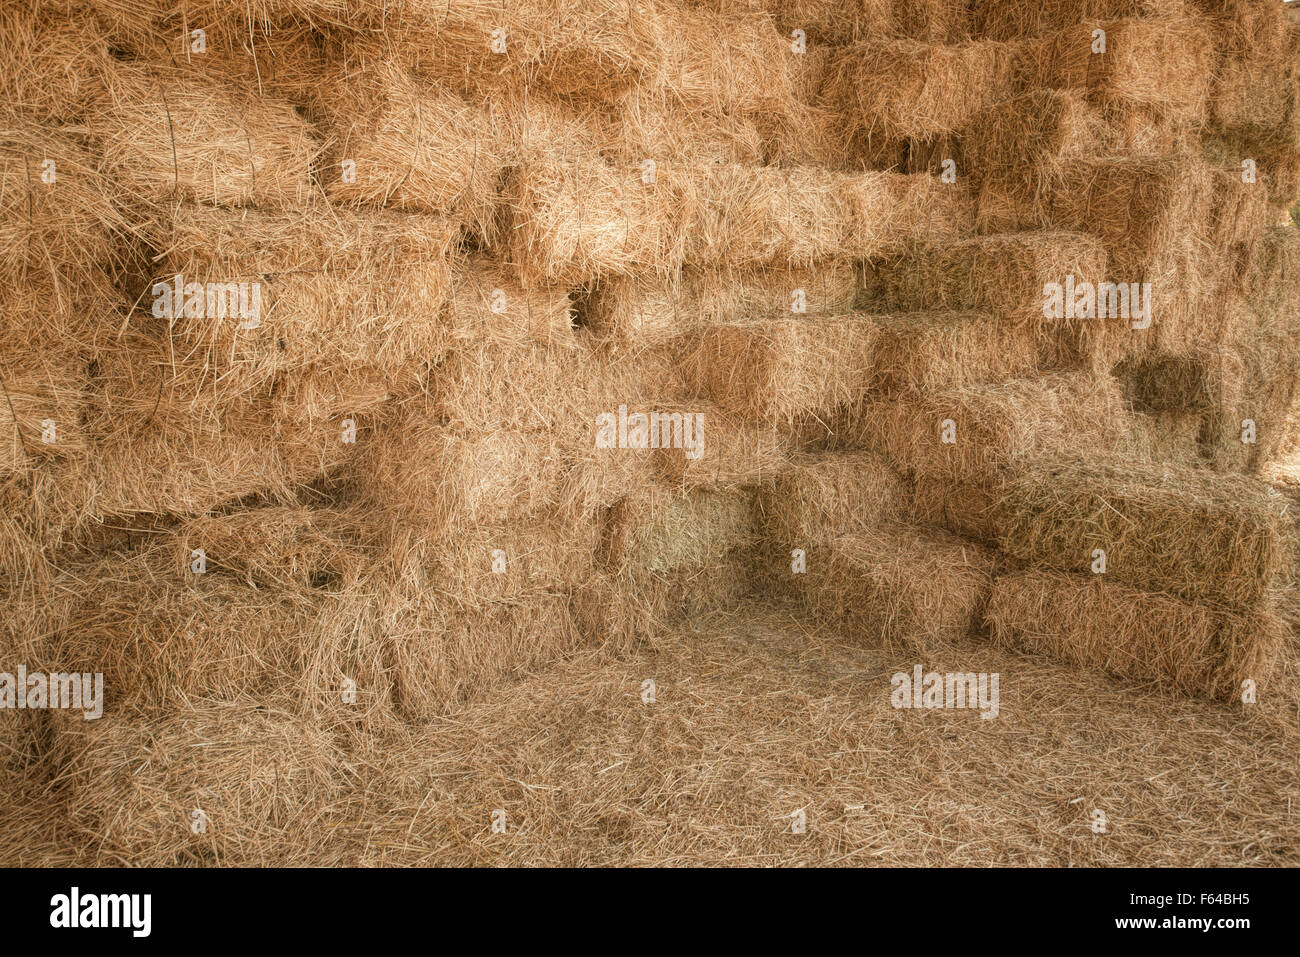 Straw  warehouse ,aggriculture industry Stock Photo